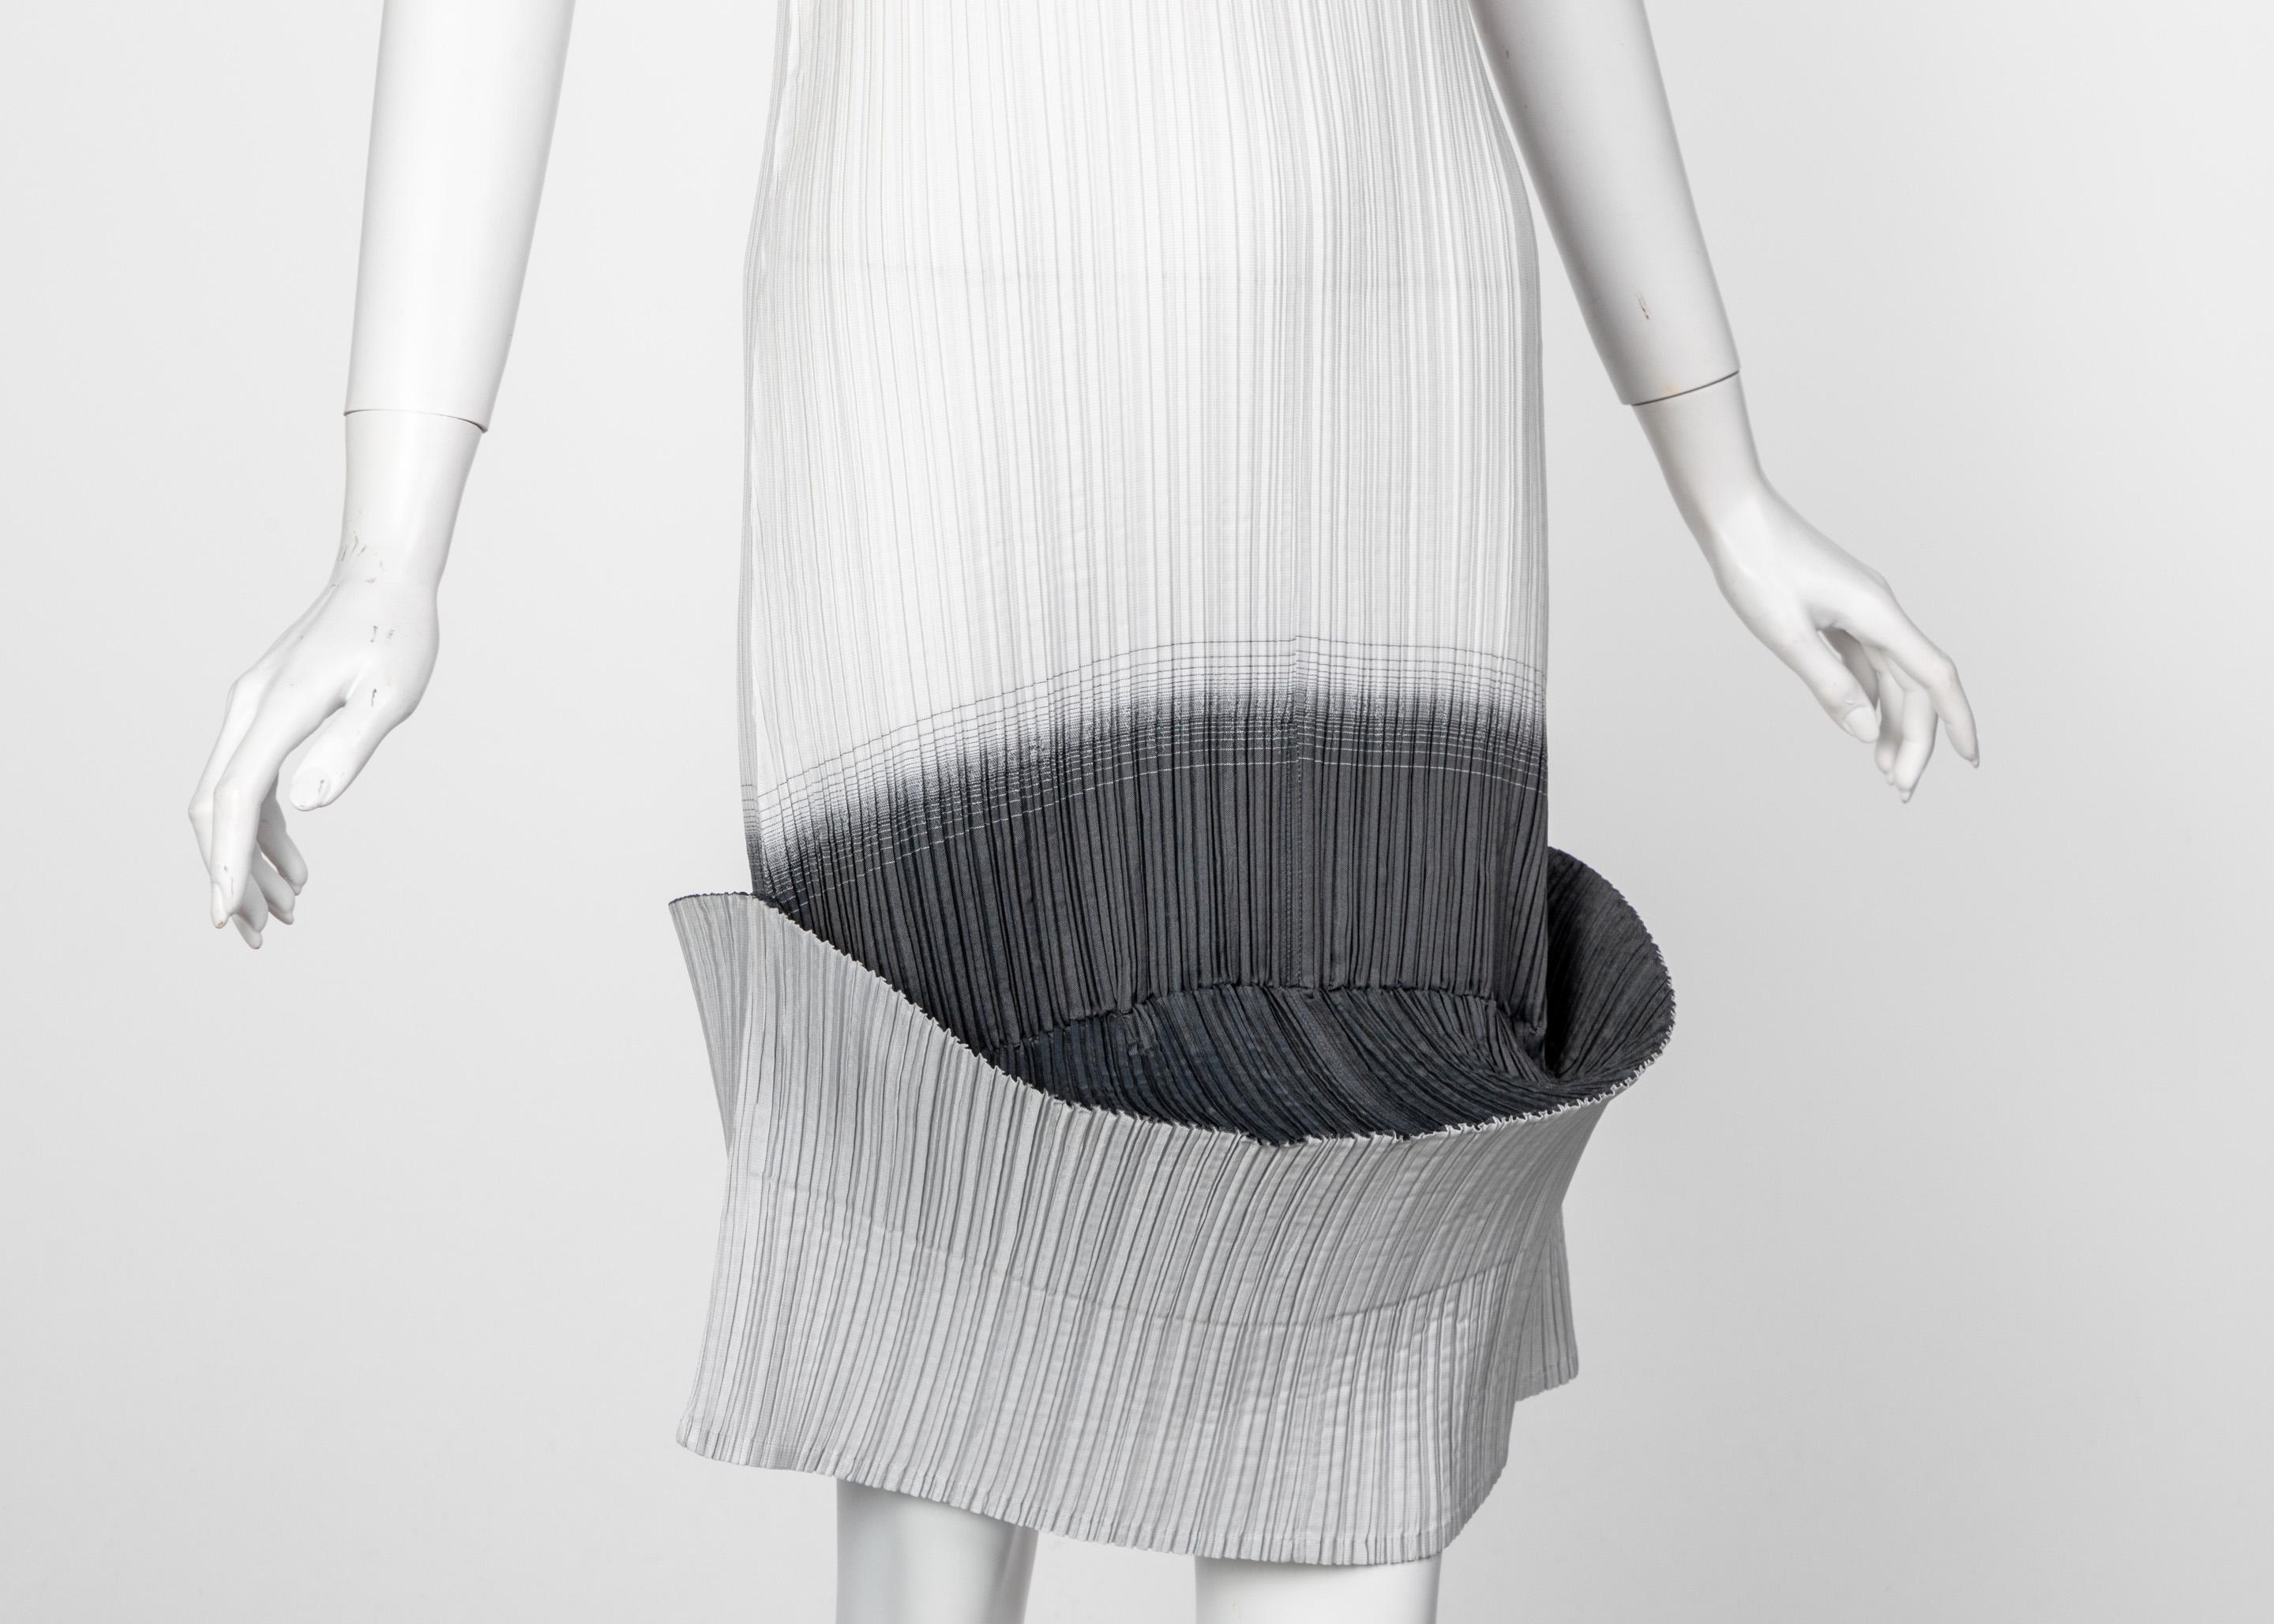 Issey Miyake “A Piece of Cloth” 2-Way White Gray Sleeveless Sculptural Dress For Sale 3